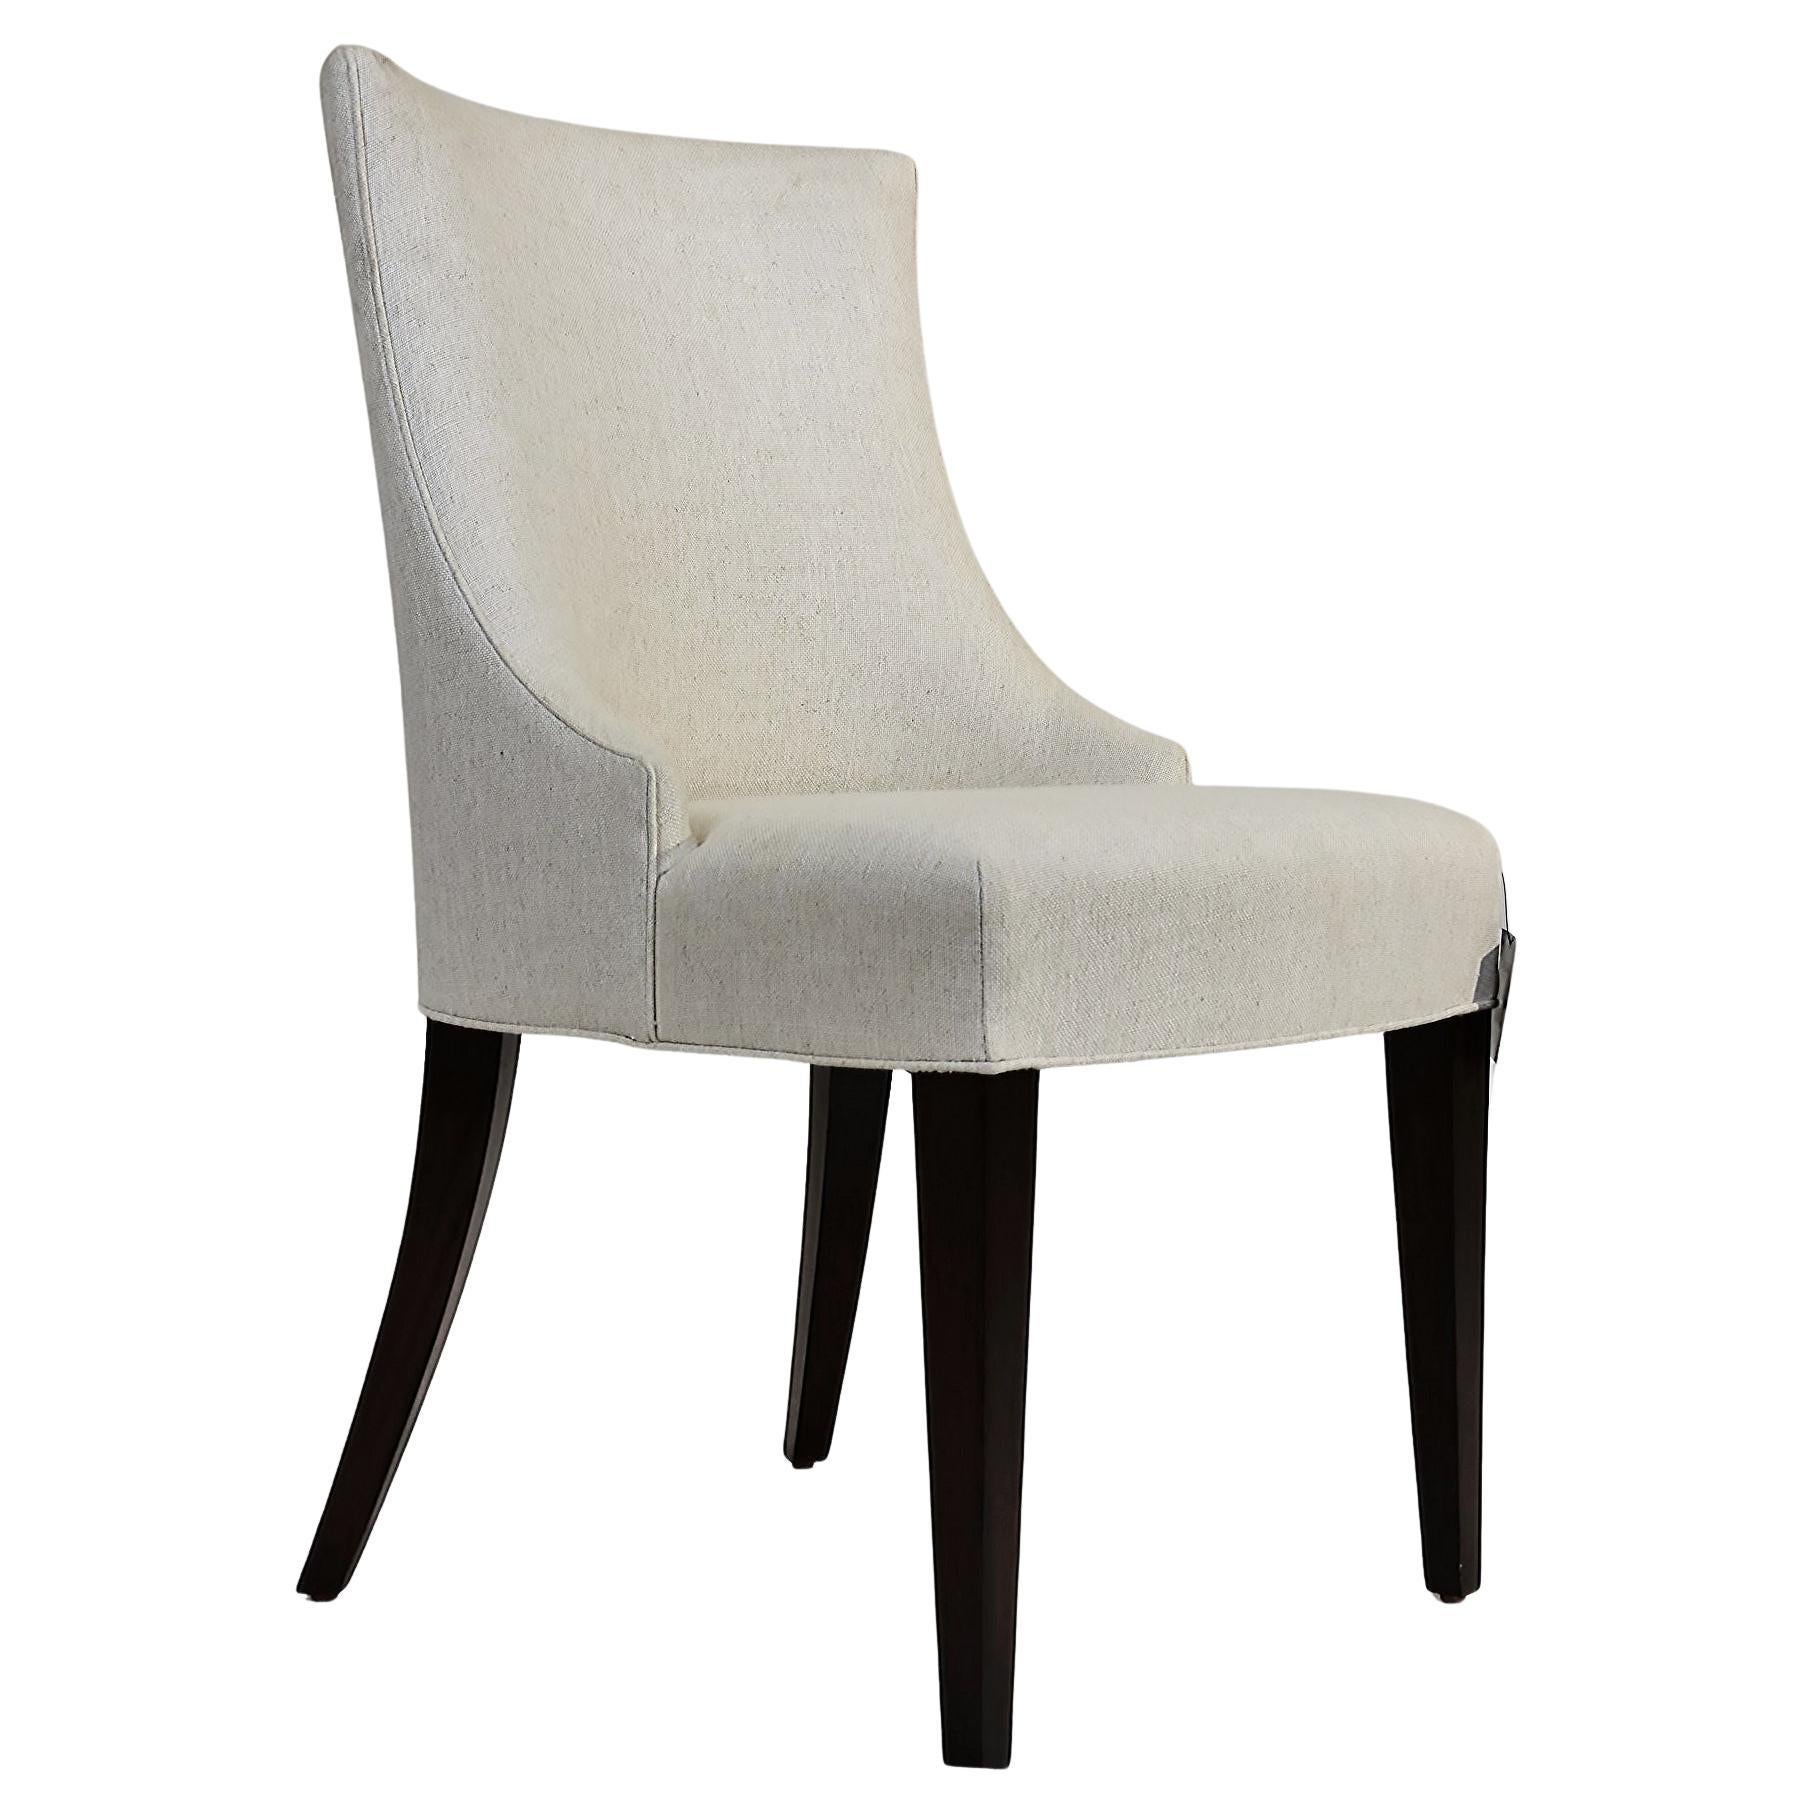 Le Jeune Upholstery "Emily Dining Chair" Showroom Model For Sale